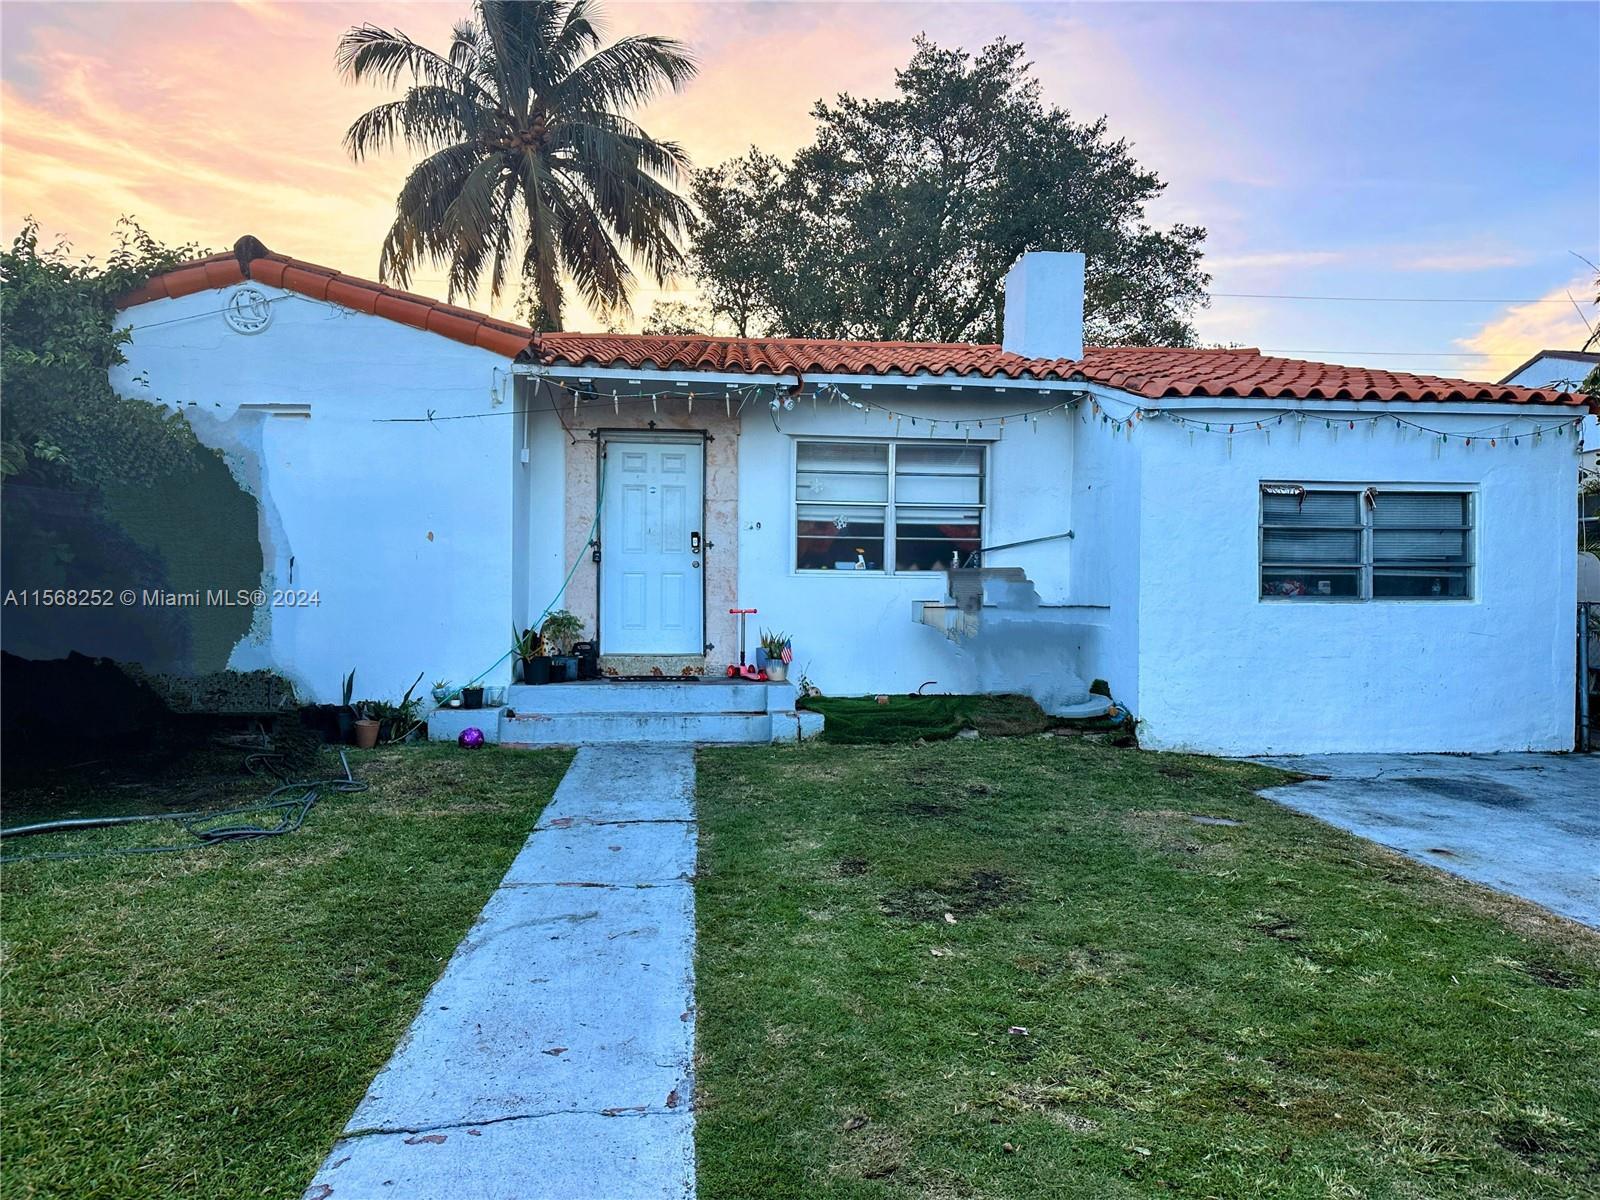 Photo of 810 NW 17th Ct in Miami, FL